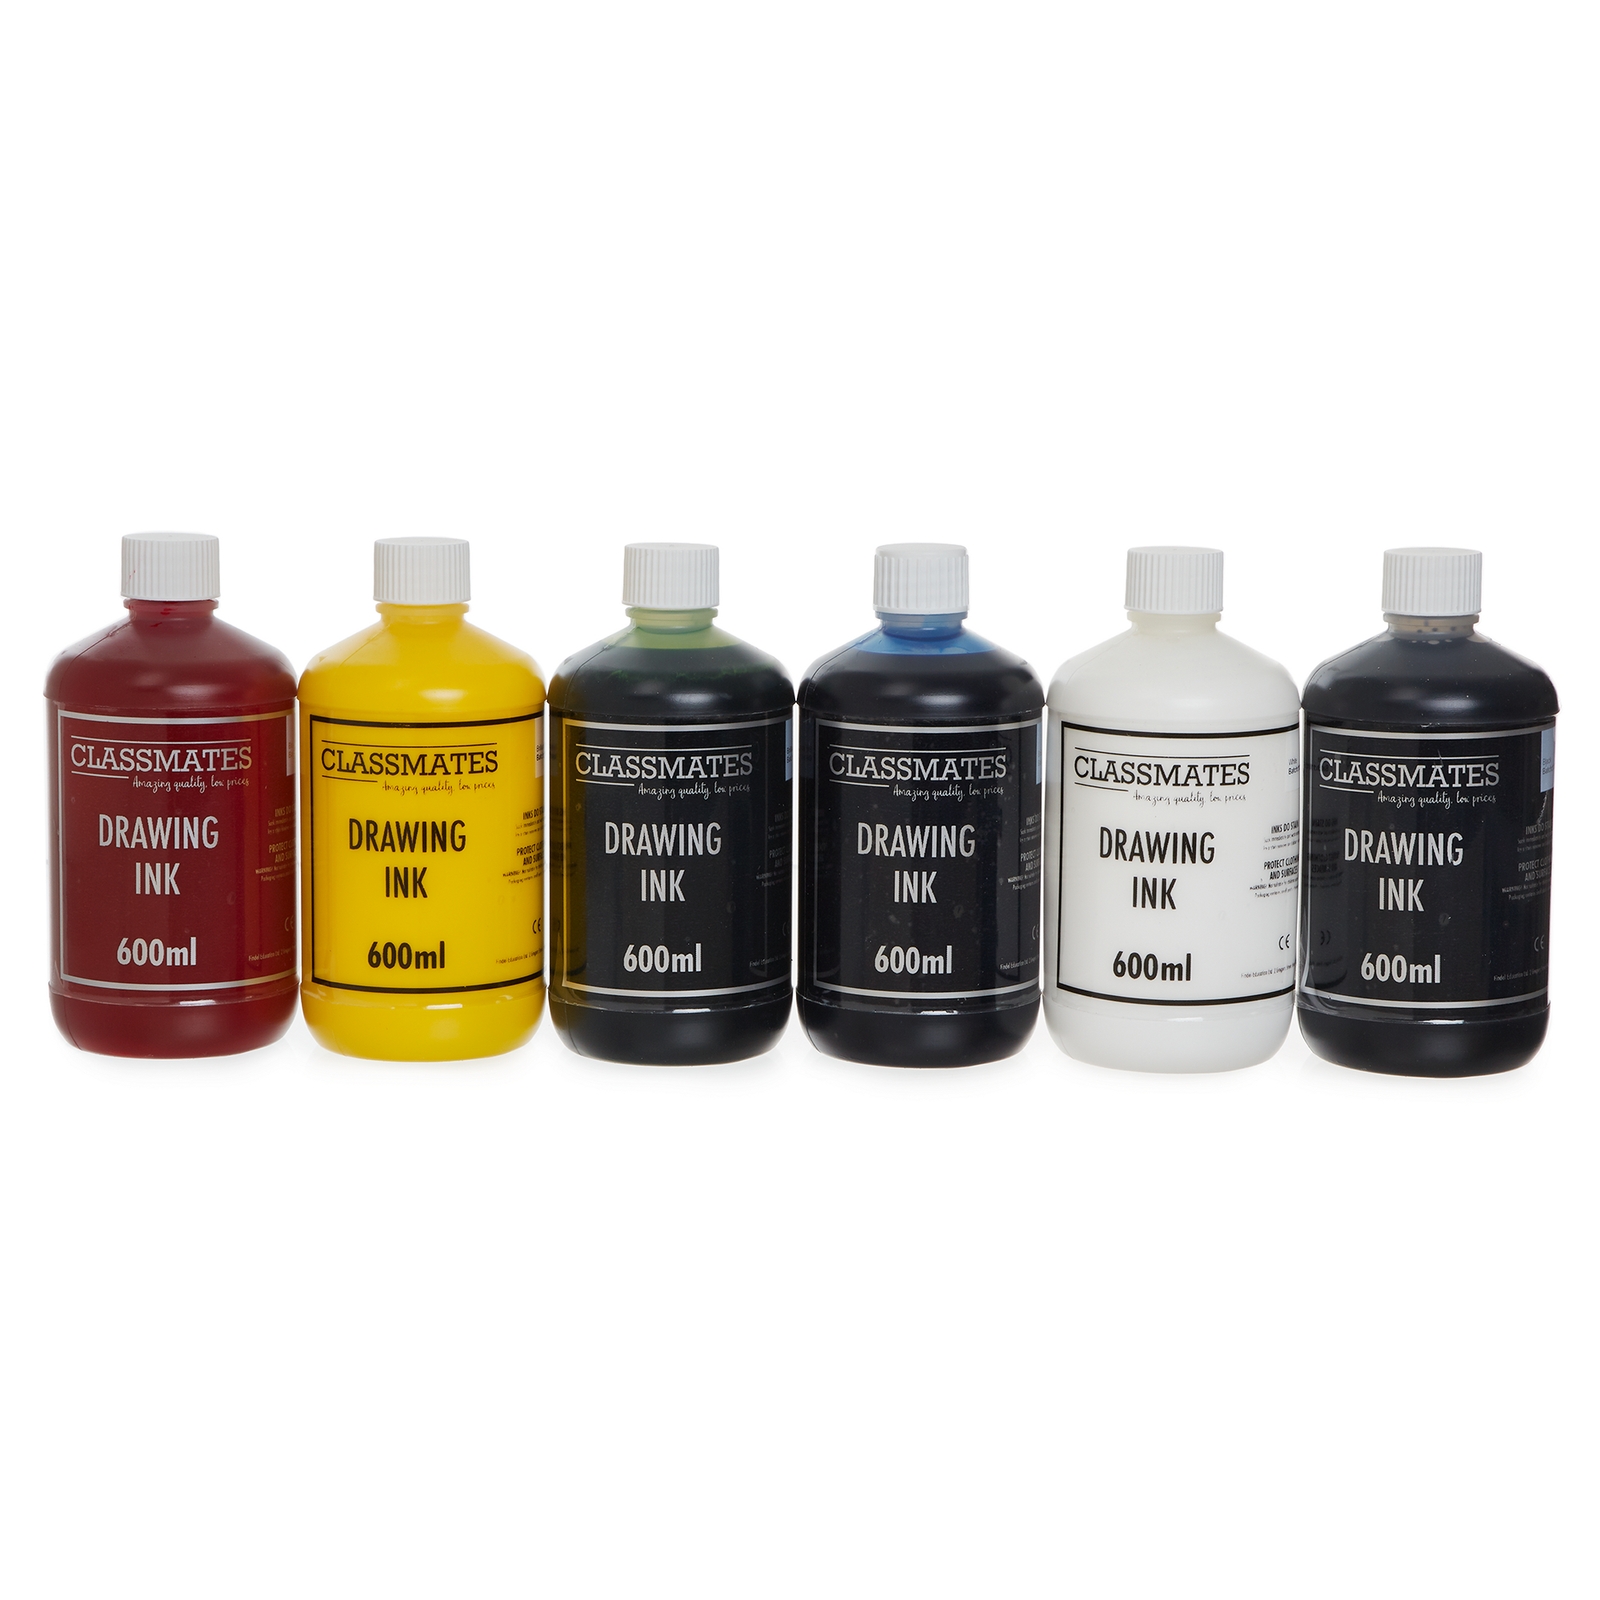 Classmates Drawing Inks - Assorted - 600ml Bottles - Pack of 6